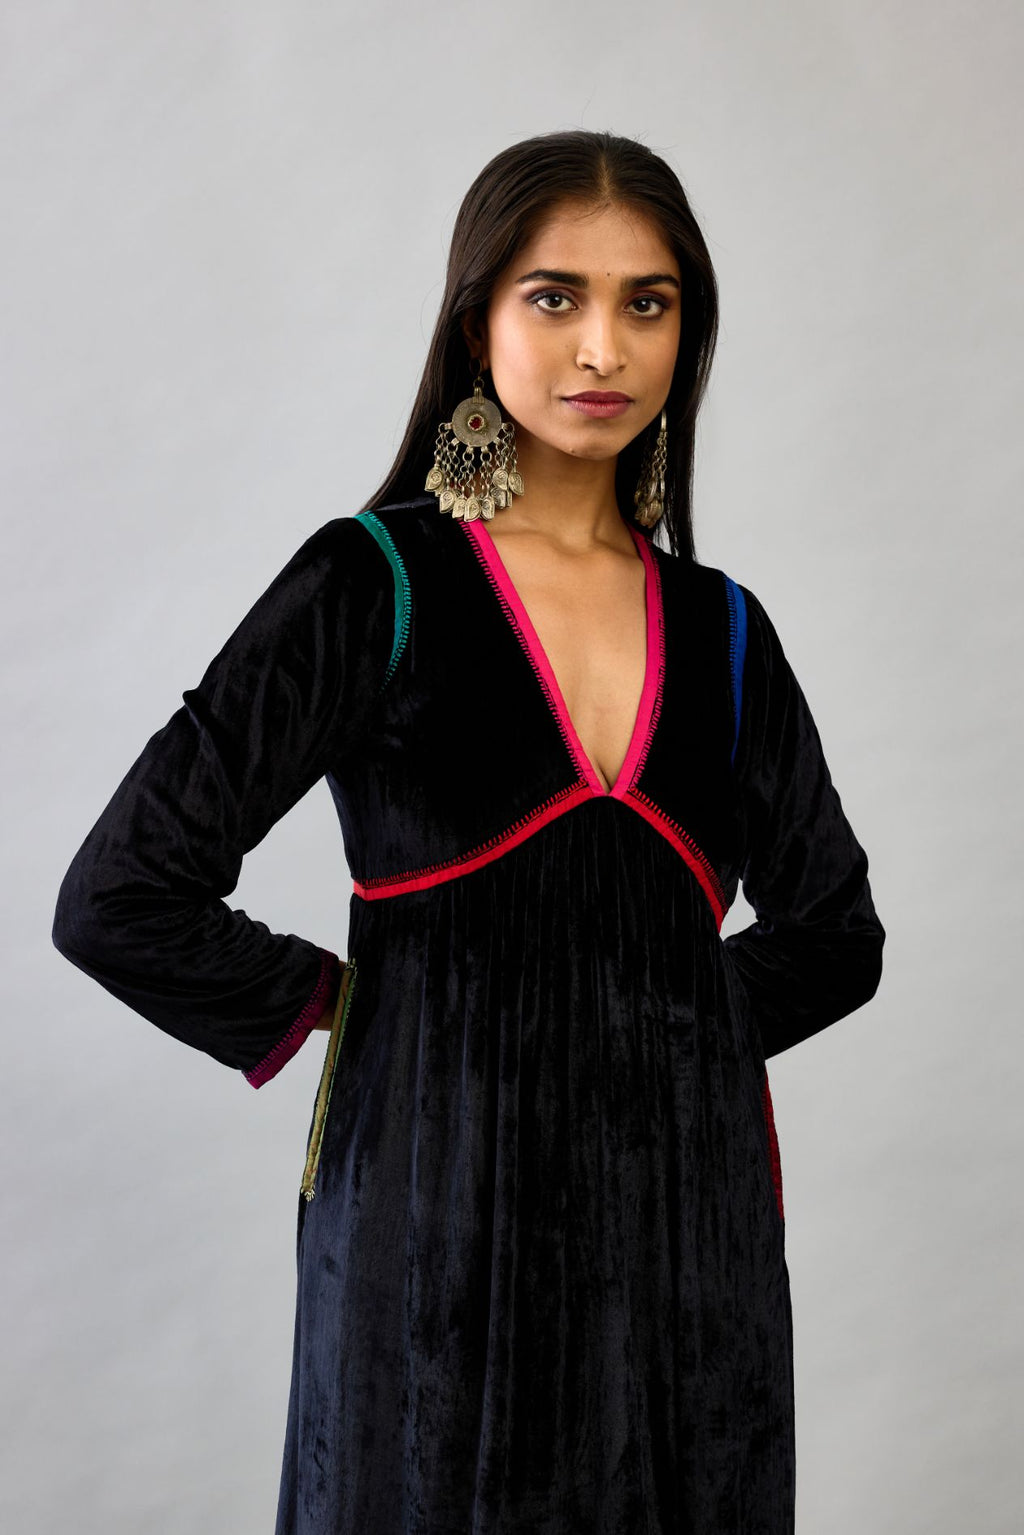 Black silk velvet kurta dress set with multi colored silk facing and embroidery details.